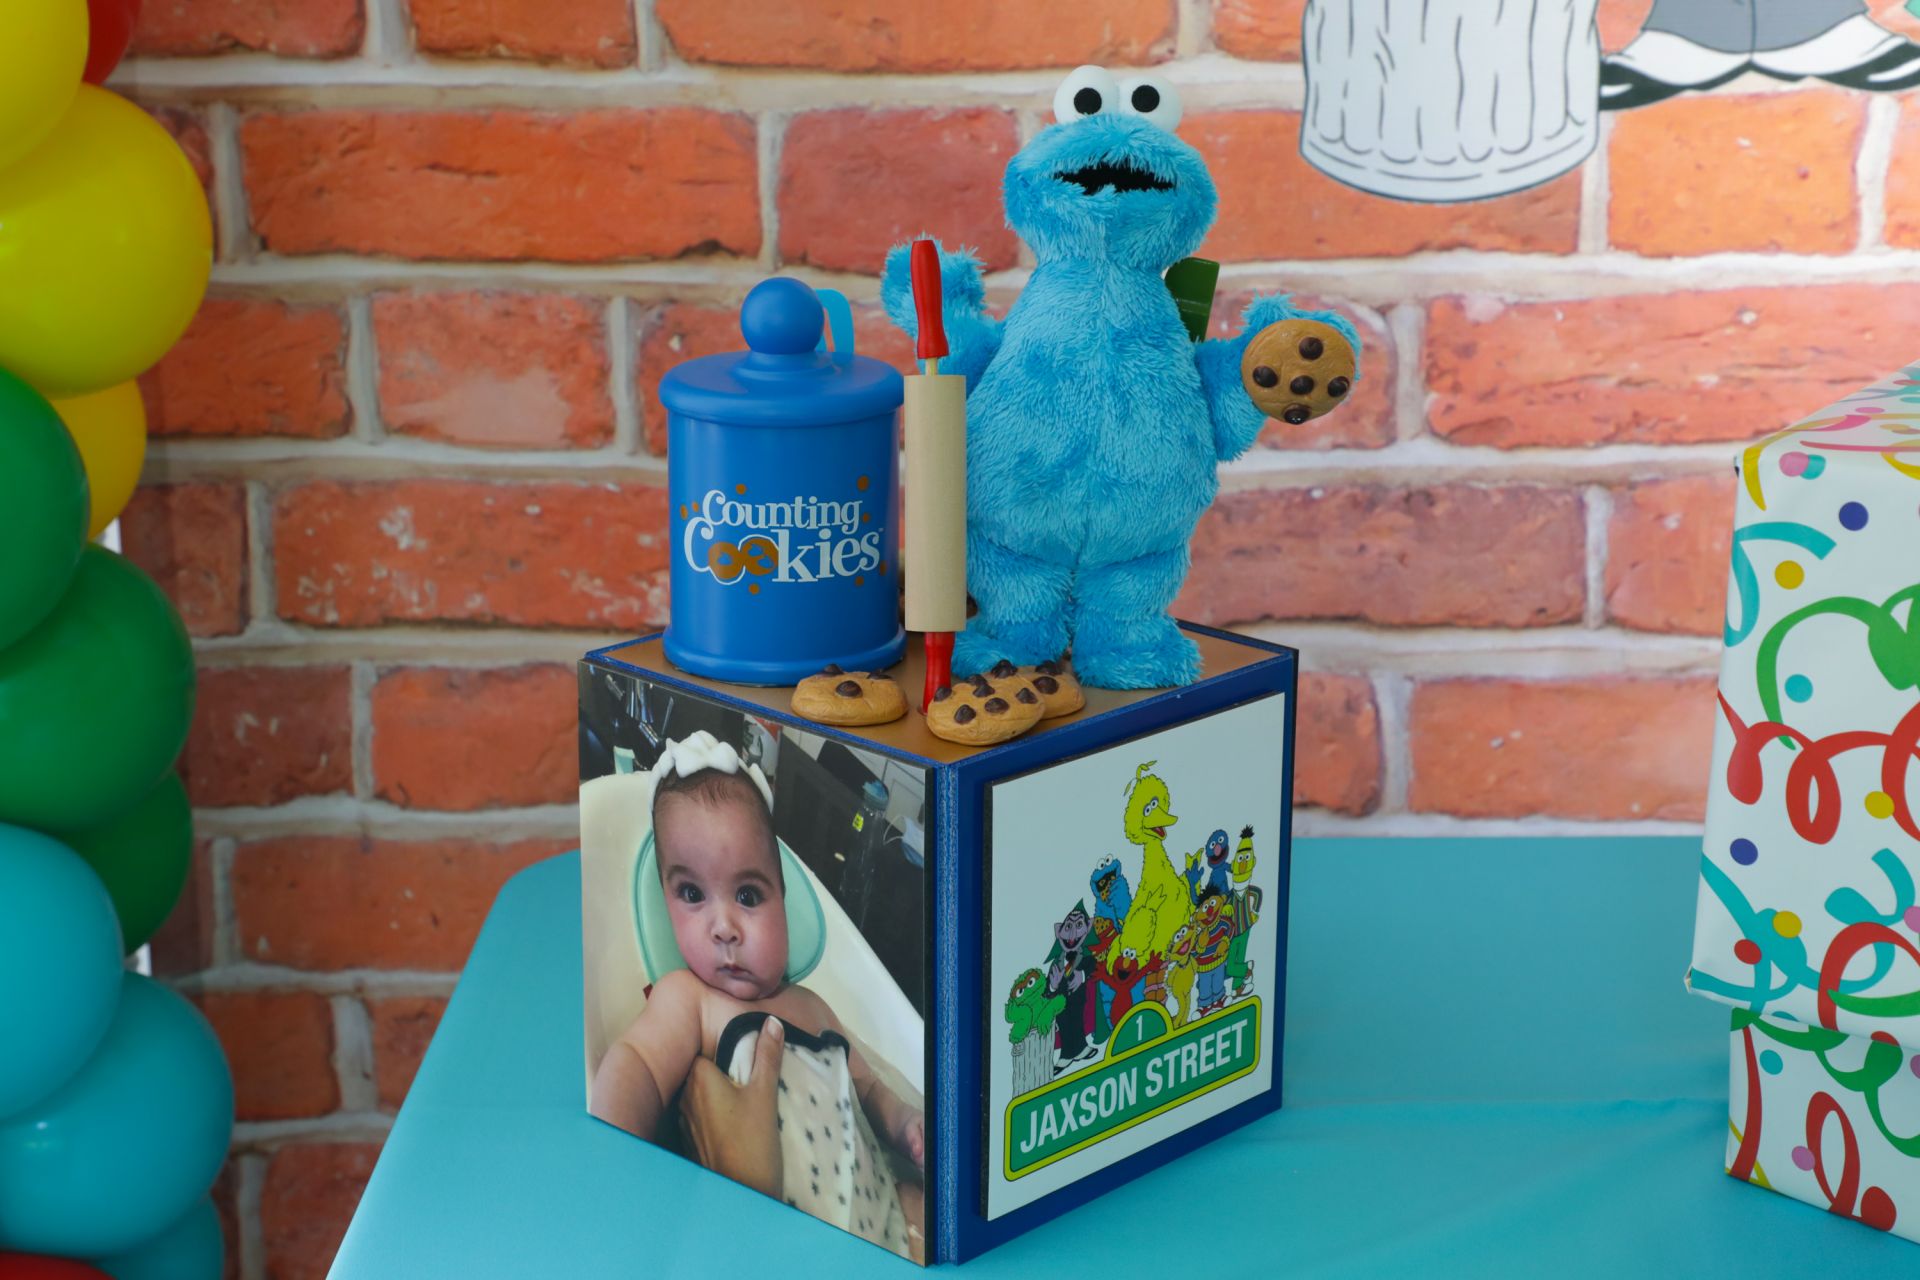 Cookie Monster Centerpiece & Table Setting I Decorated